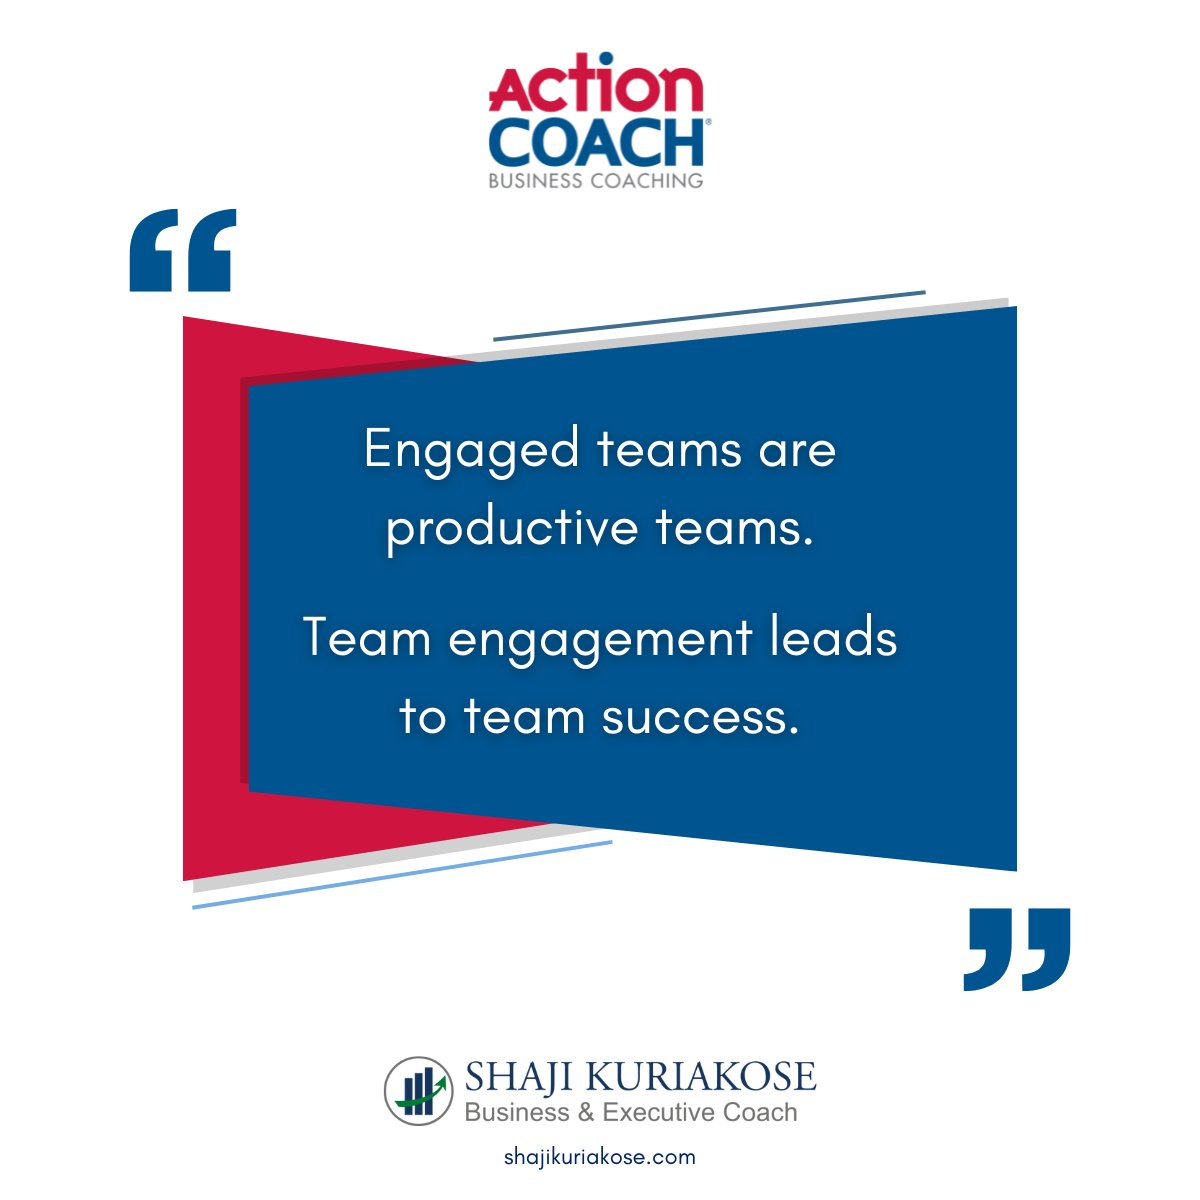 Team Engagement isn’t just a buzzword—it’s the bedrock of productivity and success.

#Teamwork #Leadership #Success
#actioncoach #shajikuriakose #businesscoach #executivecoach